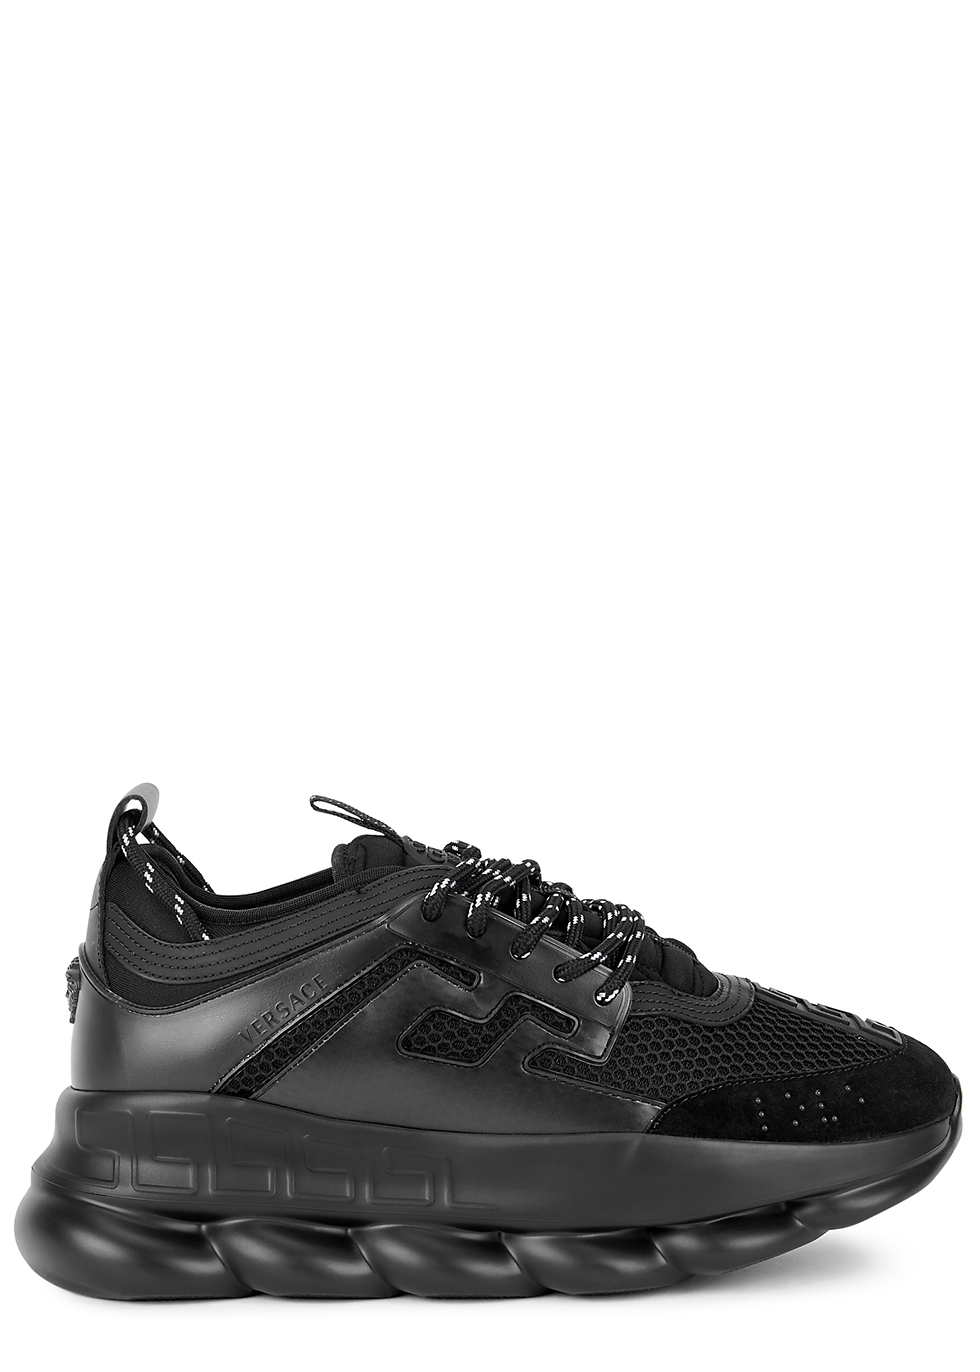 versace sneakers black and white